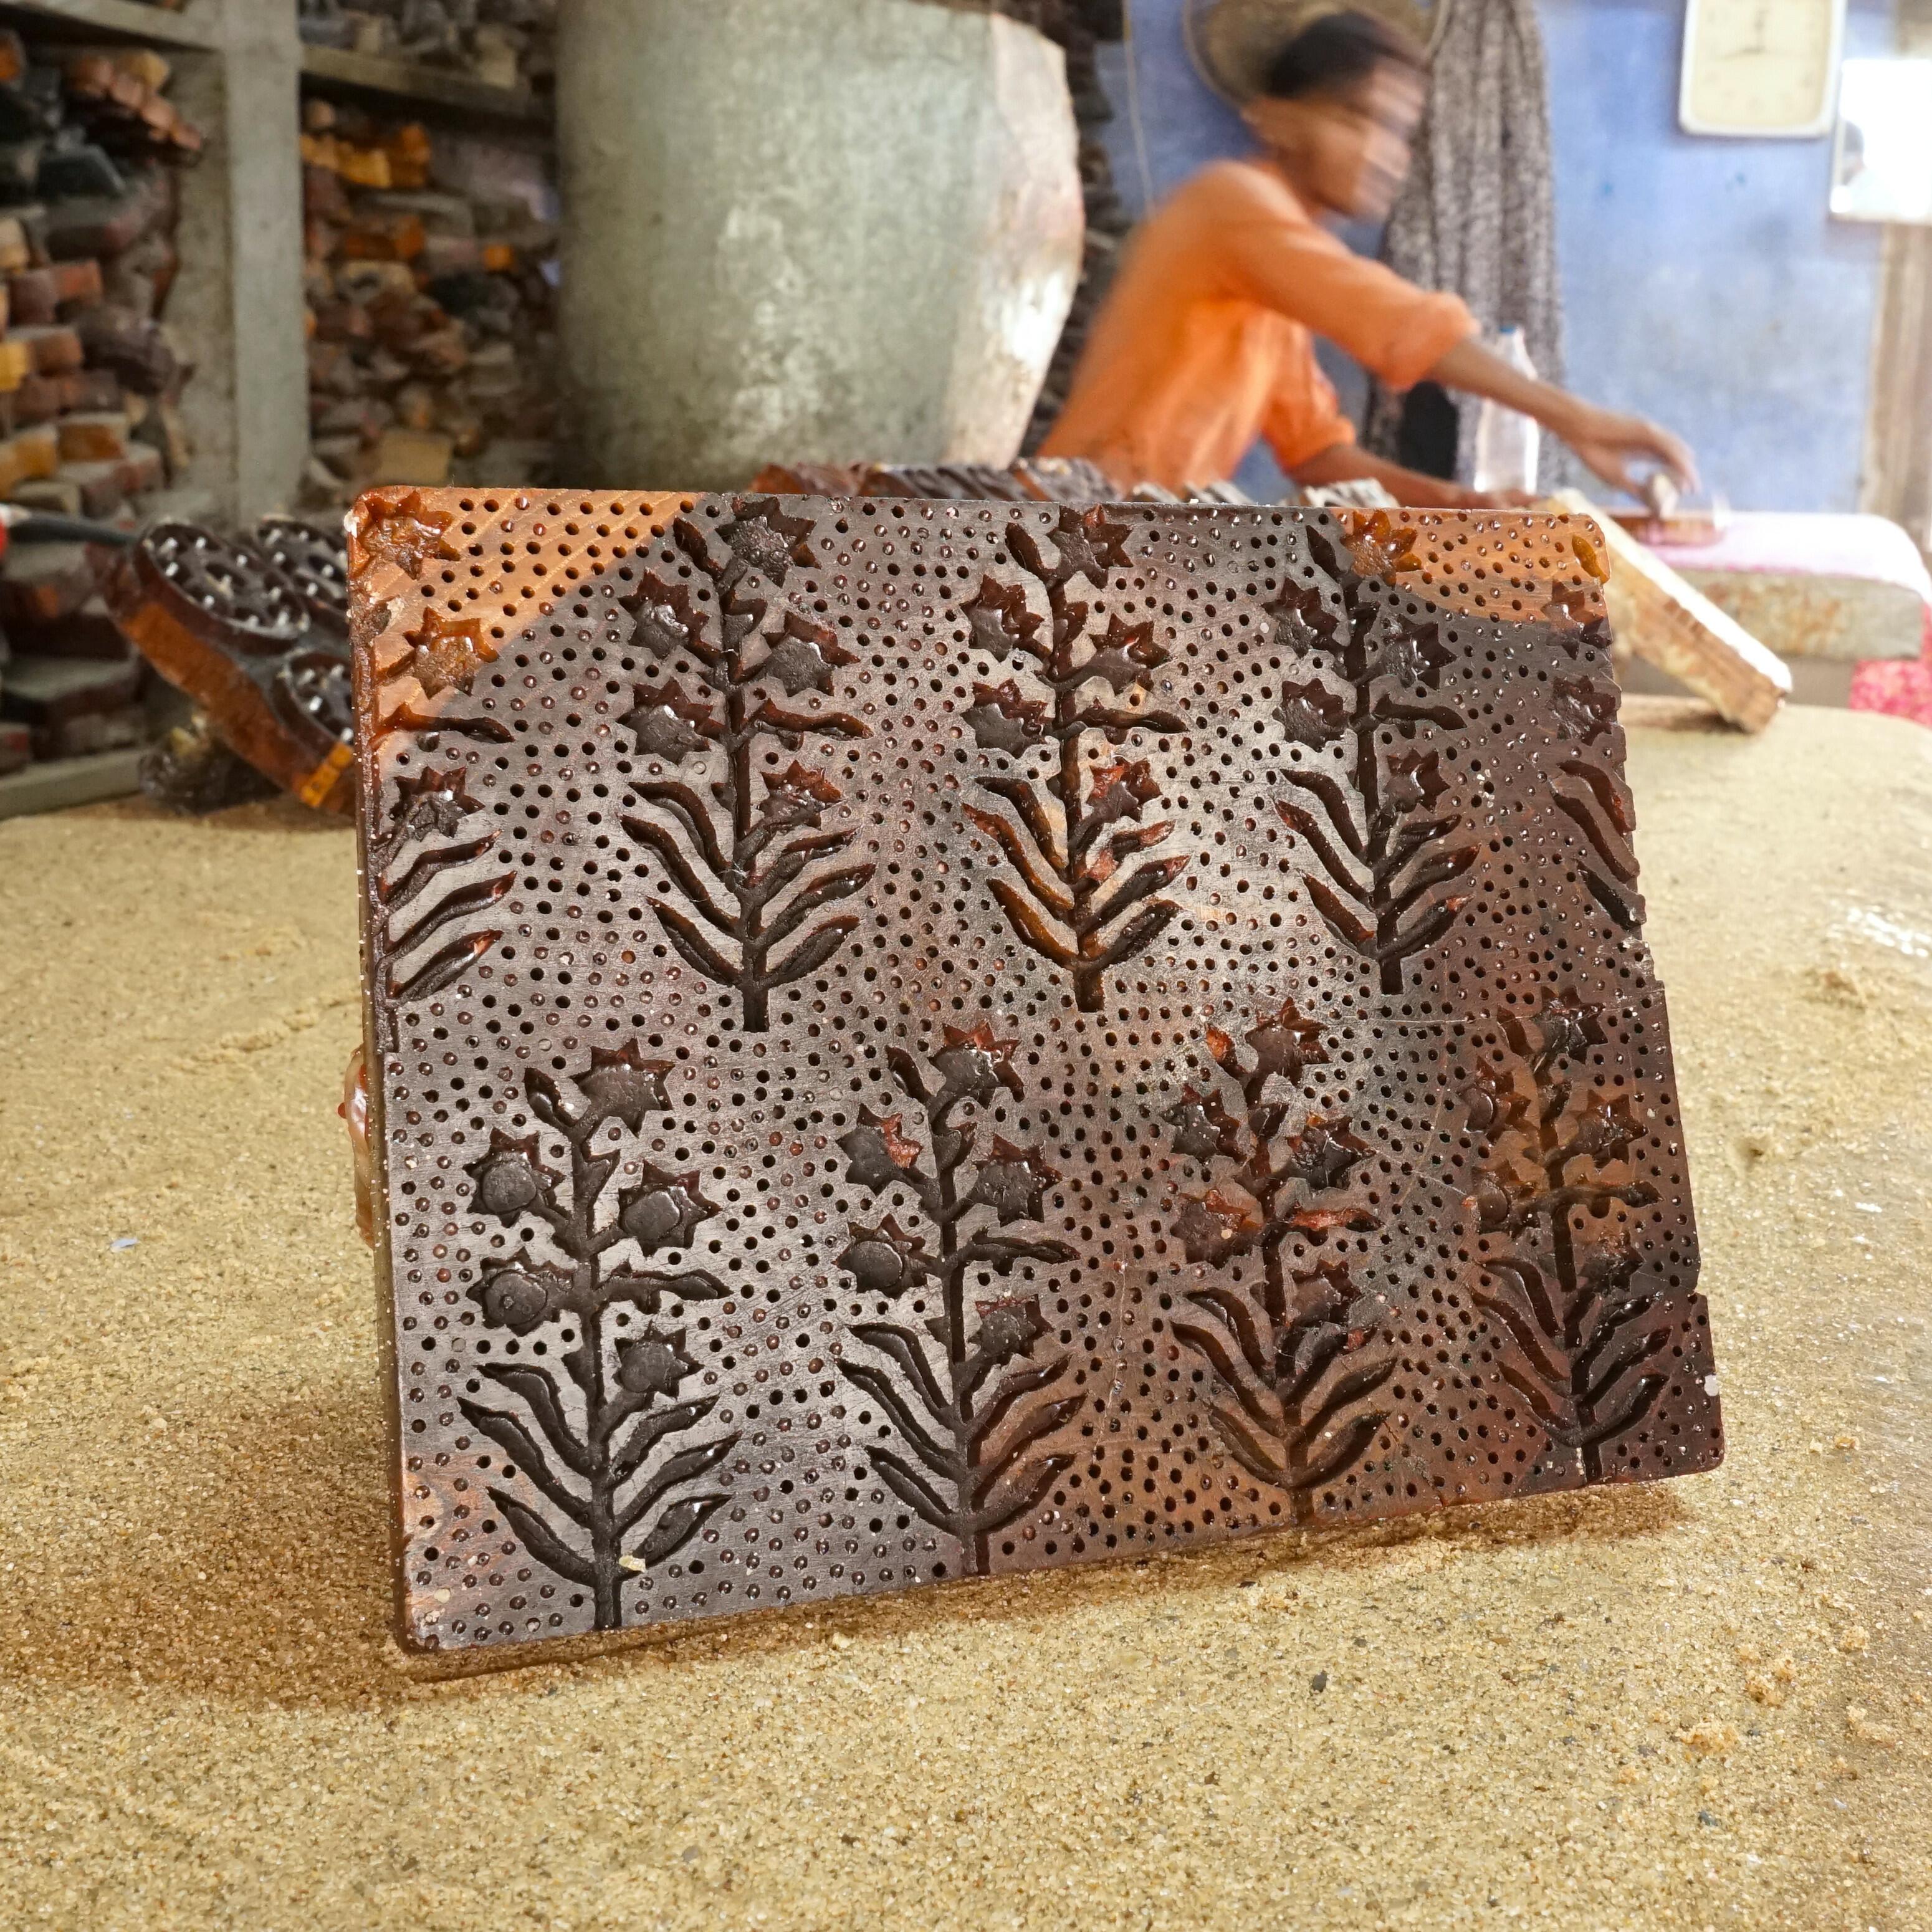 SHA51 - Hand-Carved Block for Wax Resist Printing